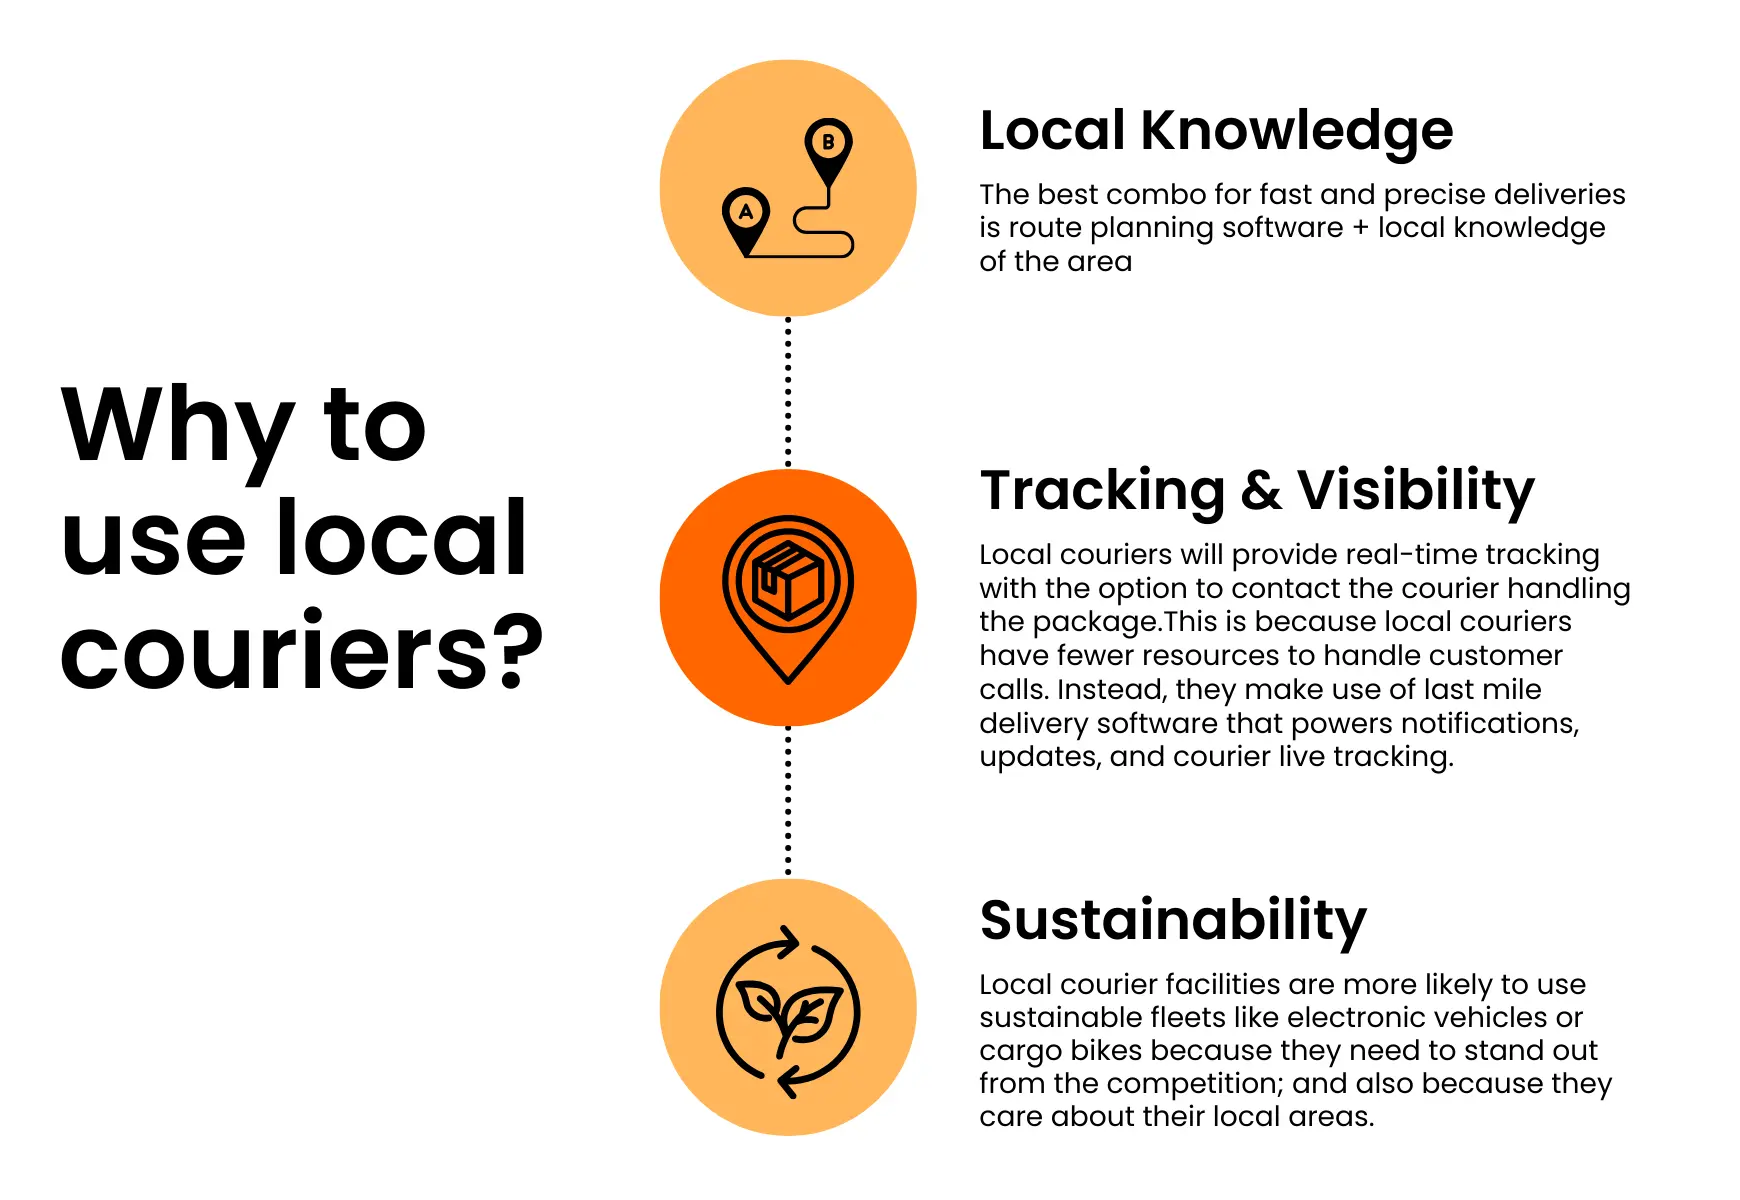 Why to use local couriers?